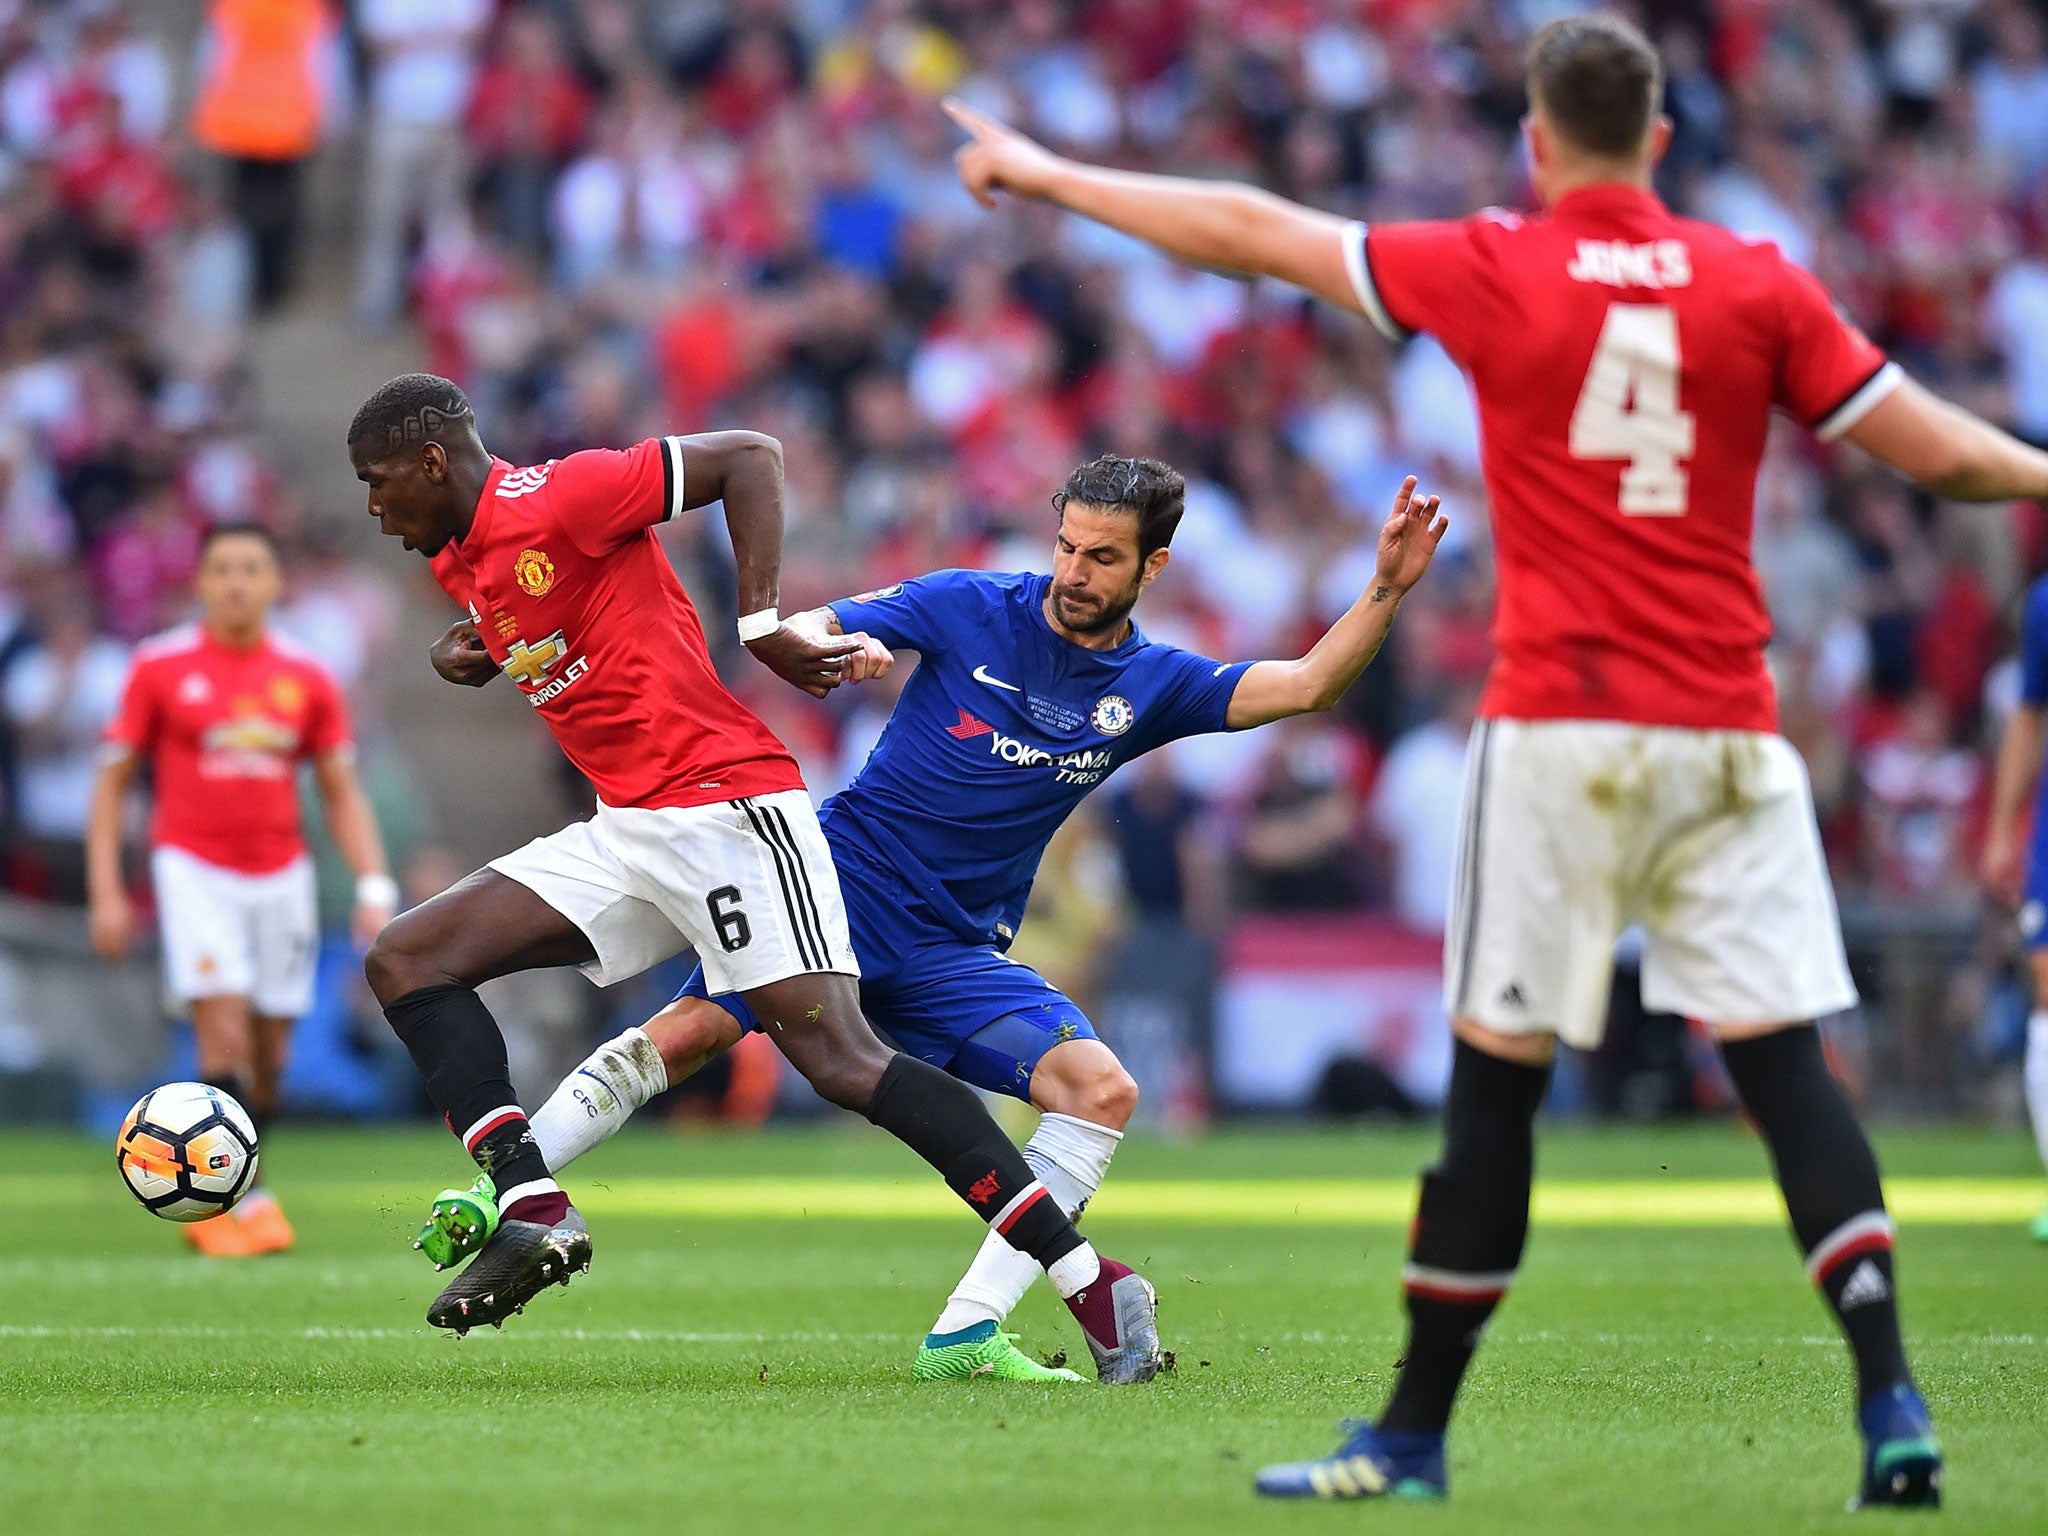 Paul Pogba attempts to get away from Cesc Fabregas